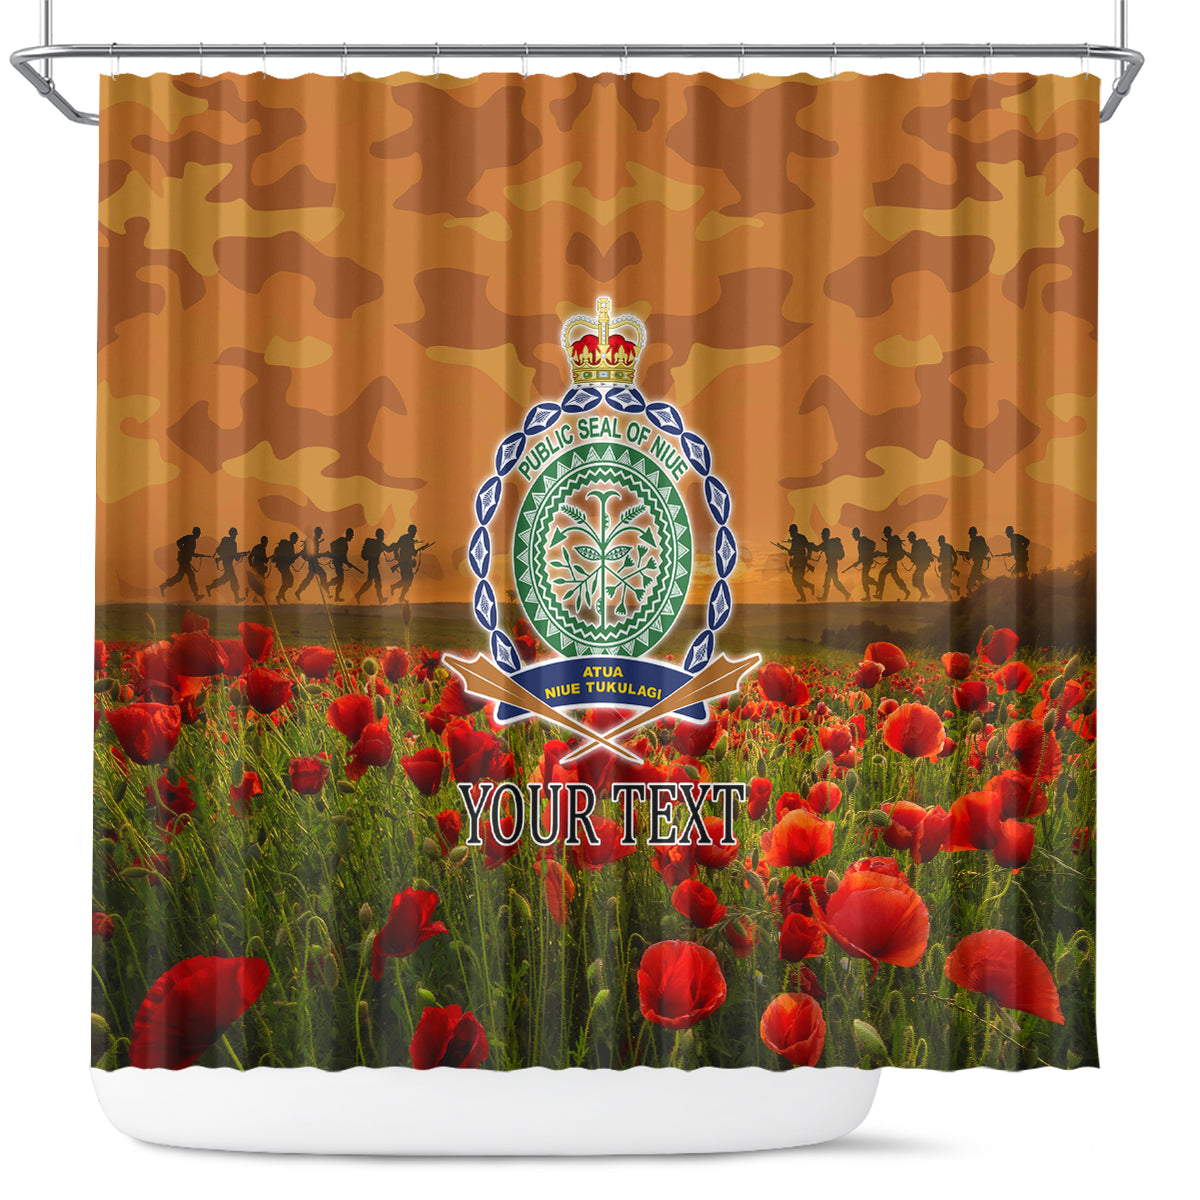 Niue ANZAC Day Personalised Shower Curtain with Poppy Field LT9 Art - Polynesian Pride